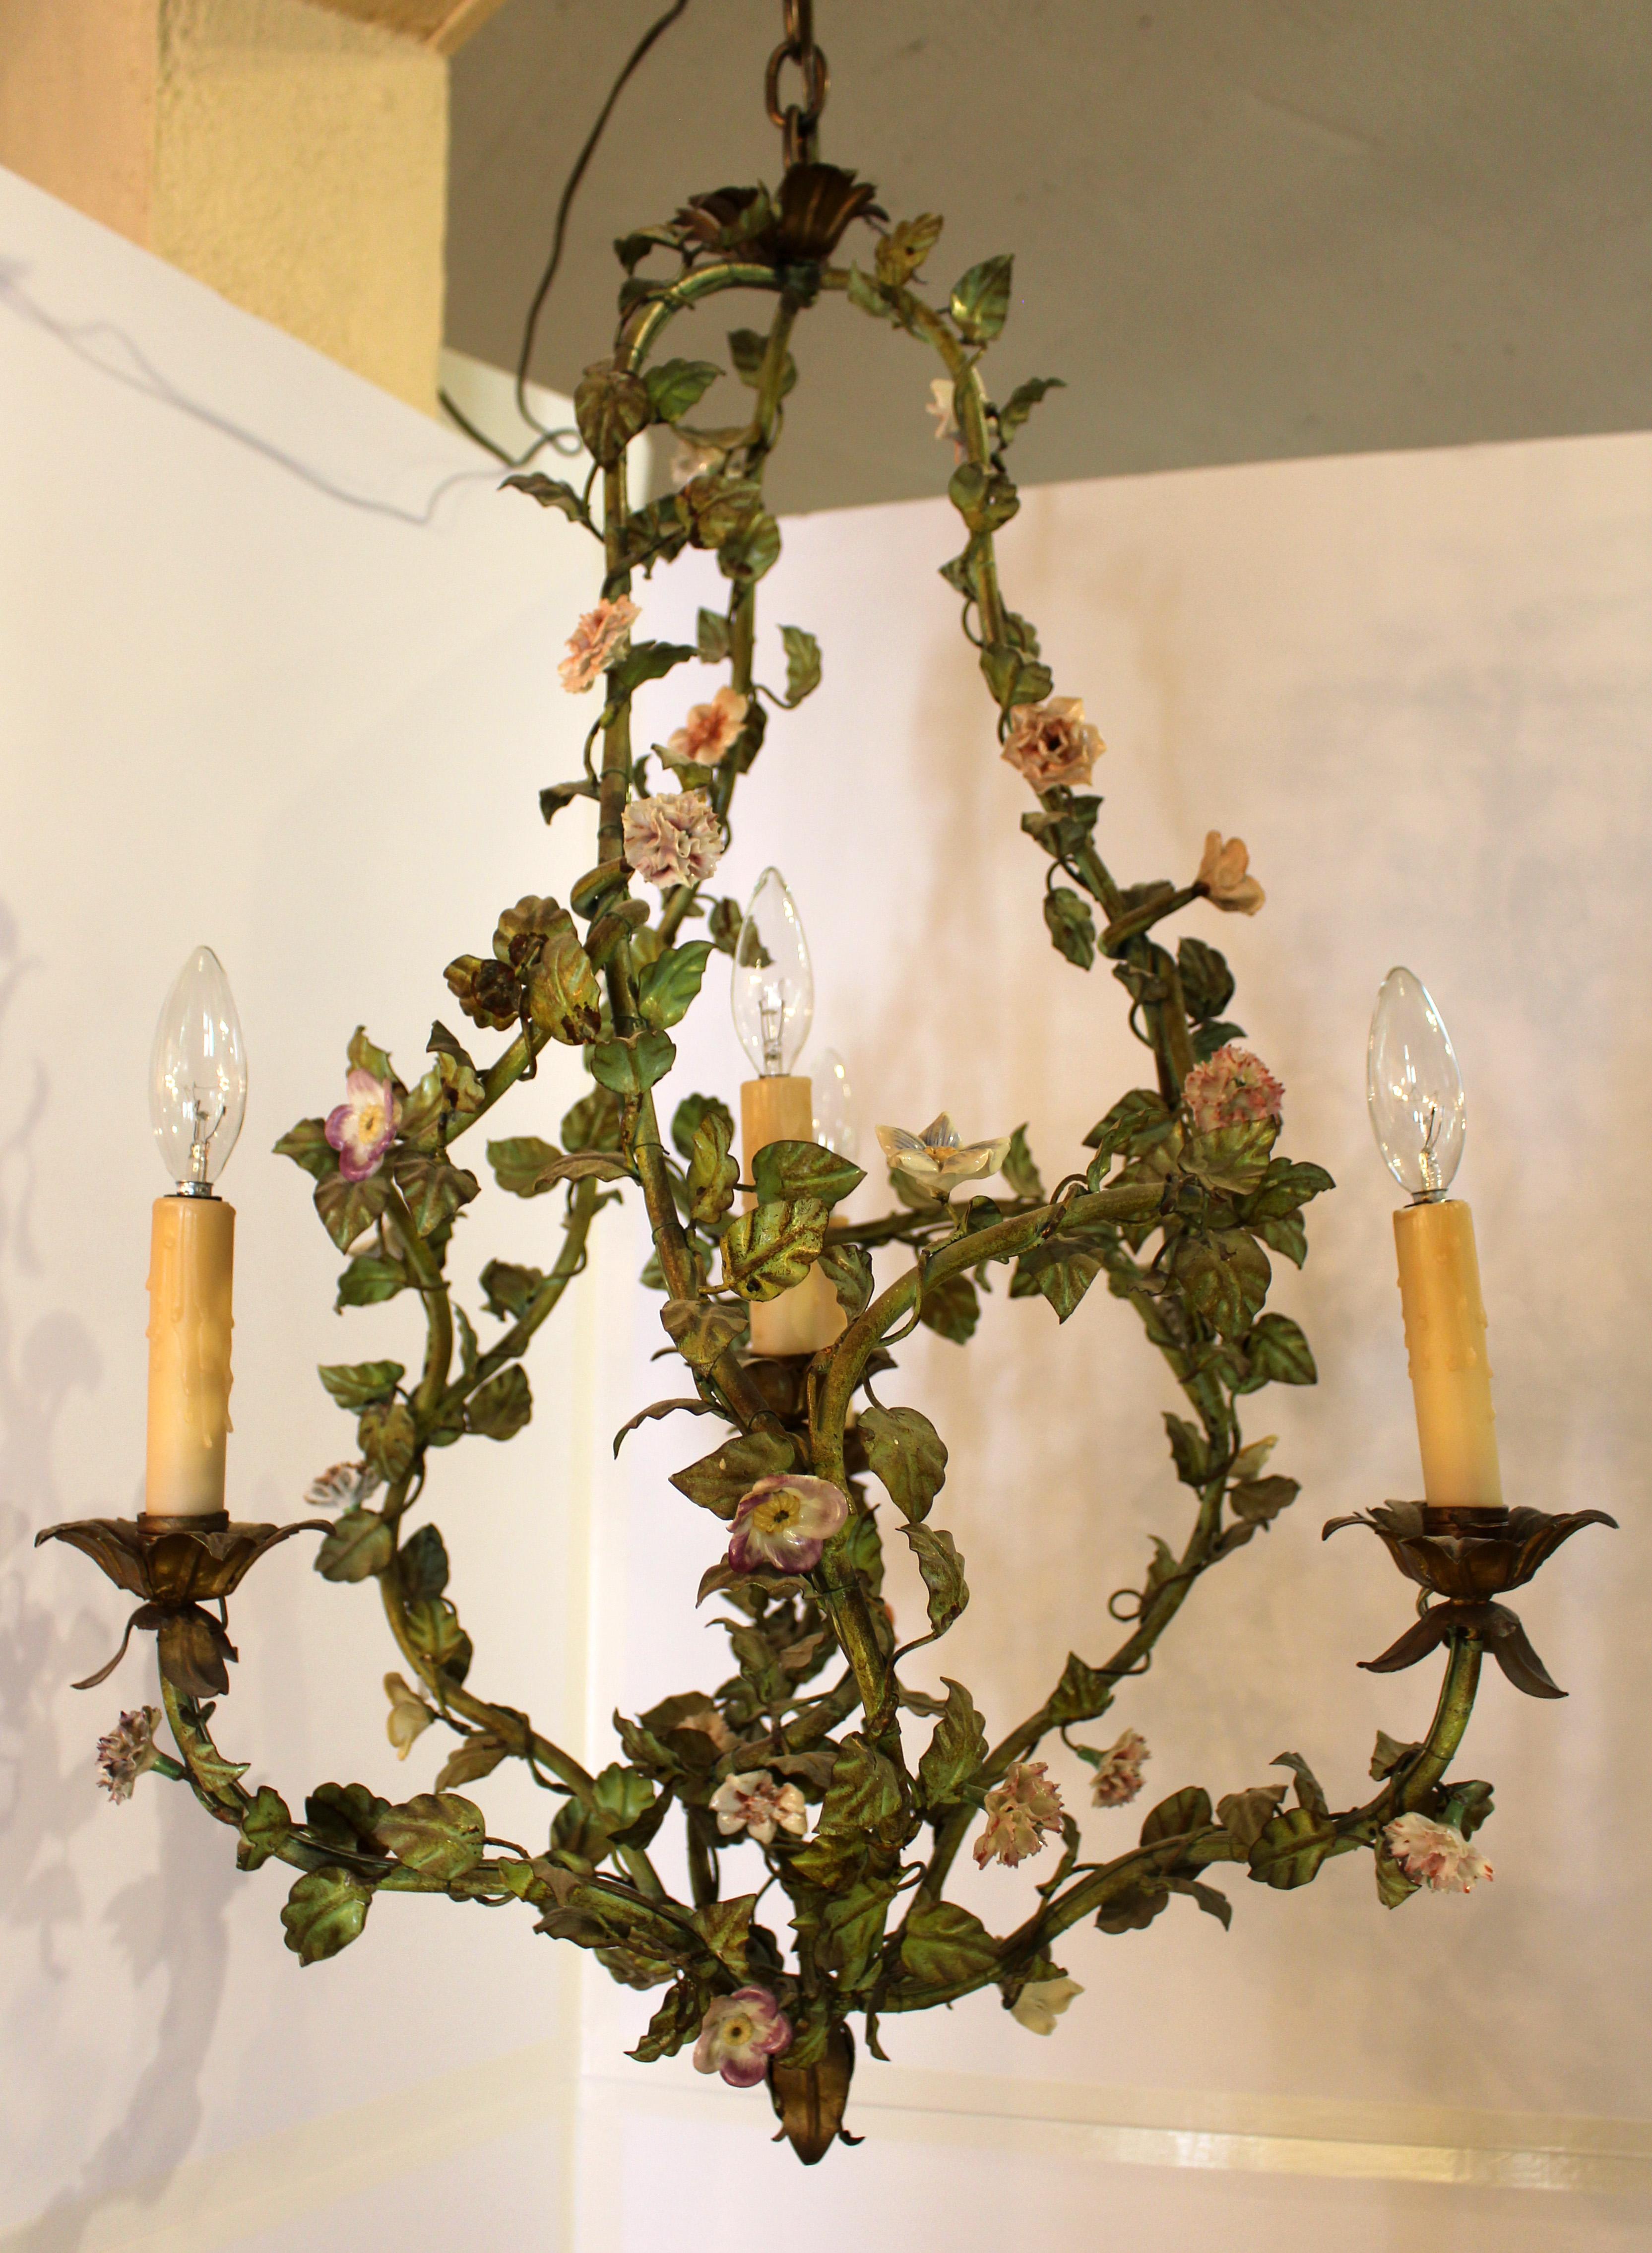 Verdigris tole 4-light chandelier, late 19th century, asymetrical Rococo design, French. The whole elaborately entwined in metal leaves with porcelain flowers and gilt acanthus leaf details. Provenance: Marvin Alexander, NYC 8/10/00